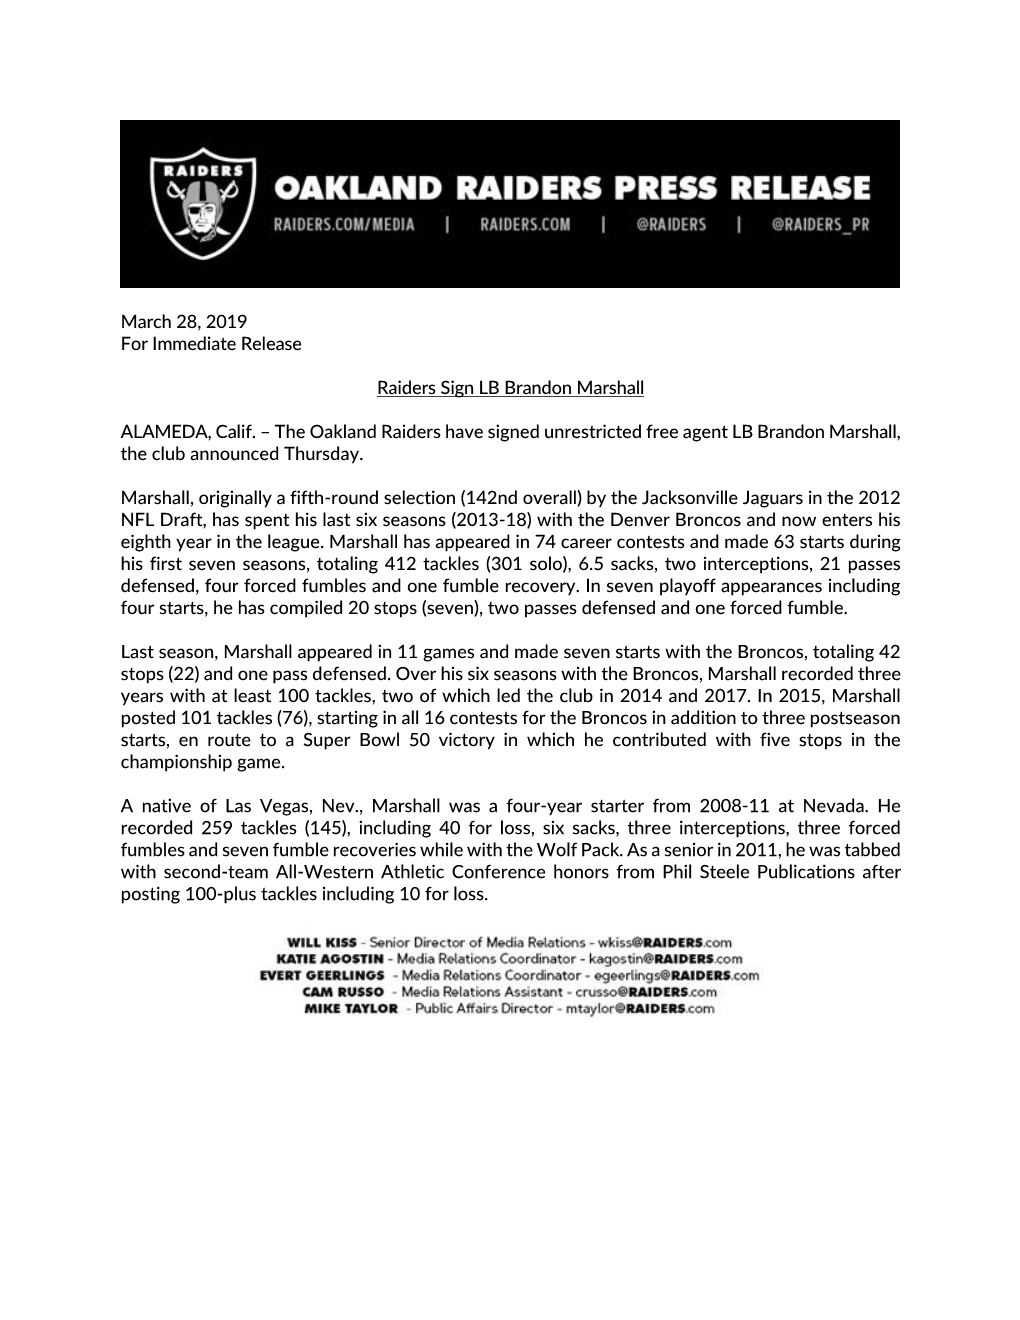 March 28, 2019 for Immediate Release Raiders Sign